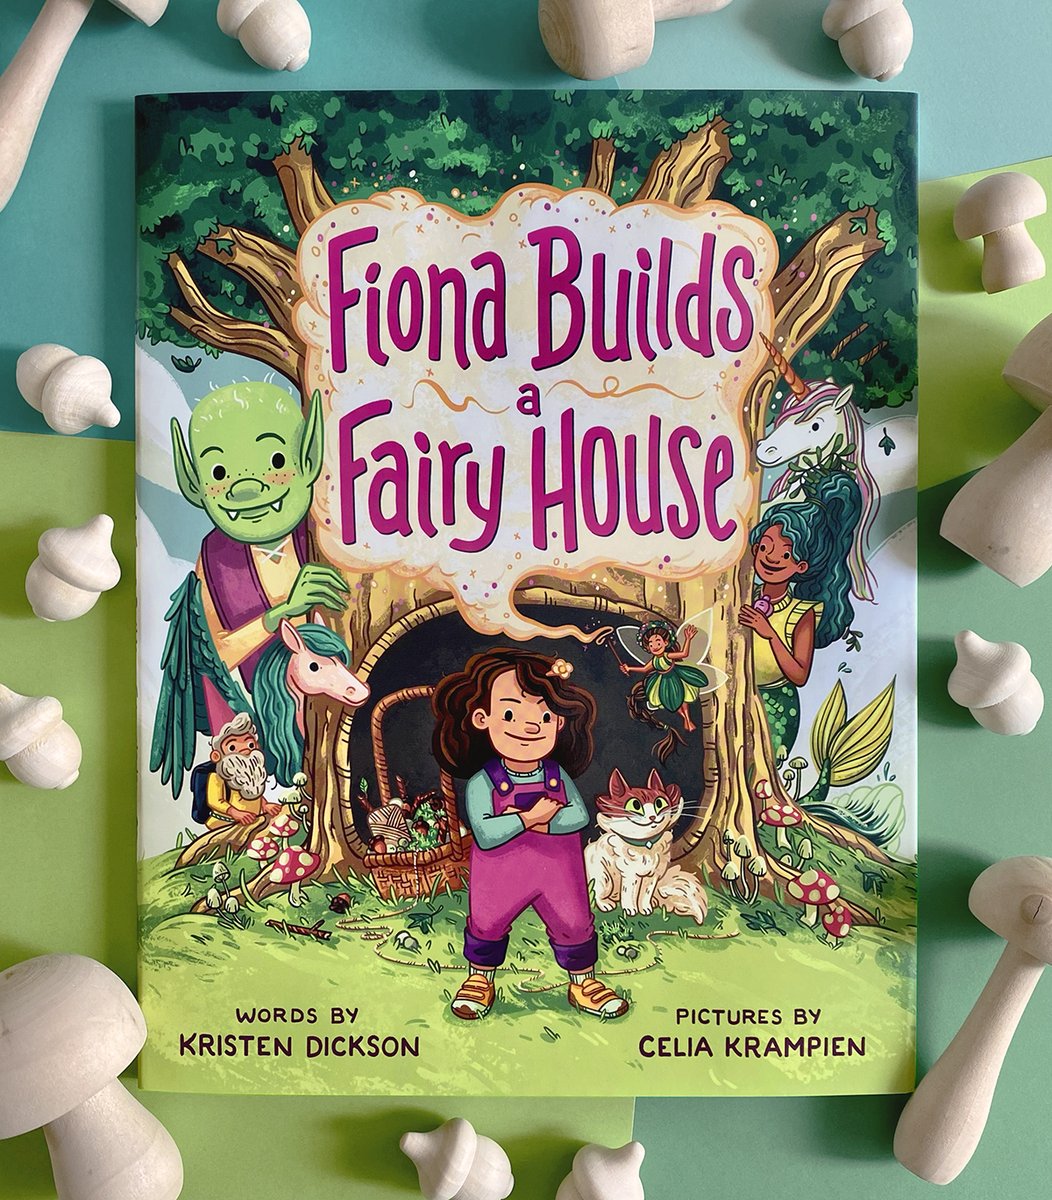 🌳🧚🏻‍♀️FIONA BUILDS A FAIRY HOUSE✨🍄by @kristendickson and me is officially out today @MacKidsBooks! Big thanks to team Fiona: @AndreaAgency @EmilyFeinberg, @EmiliaSowersby, Naomi Silverio, Mina Chung! Buy now: shorturl.at/twMQ2